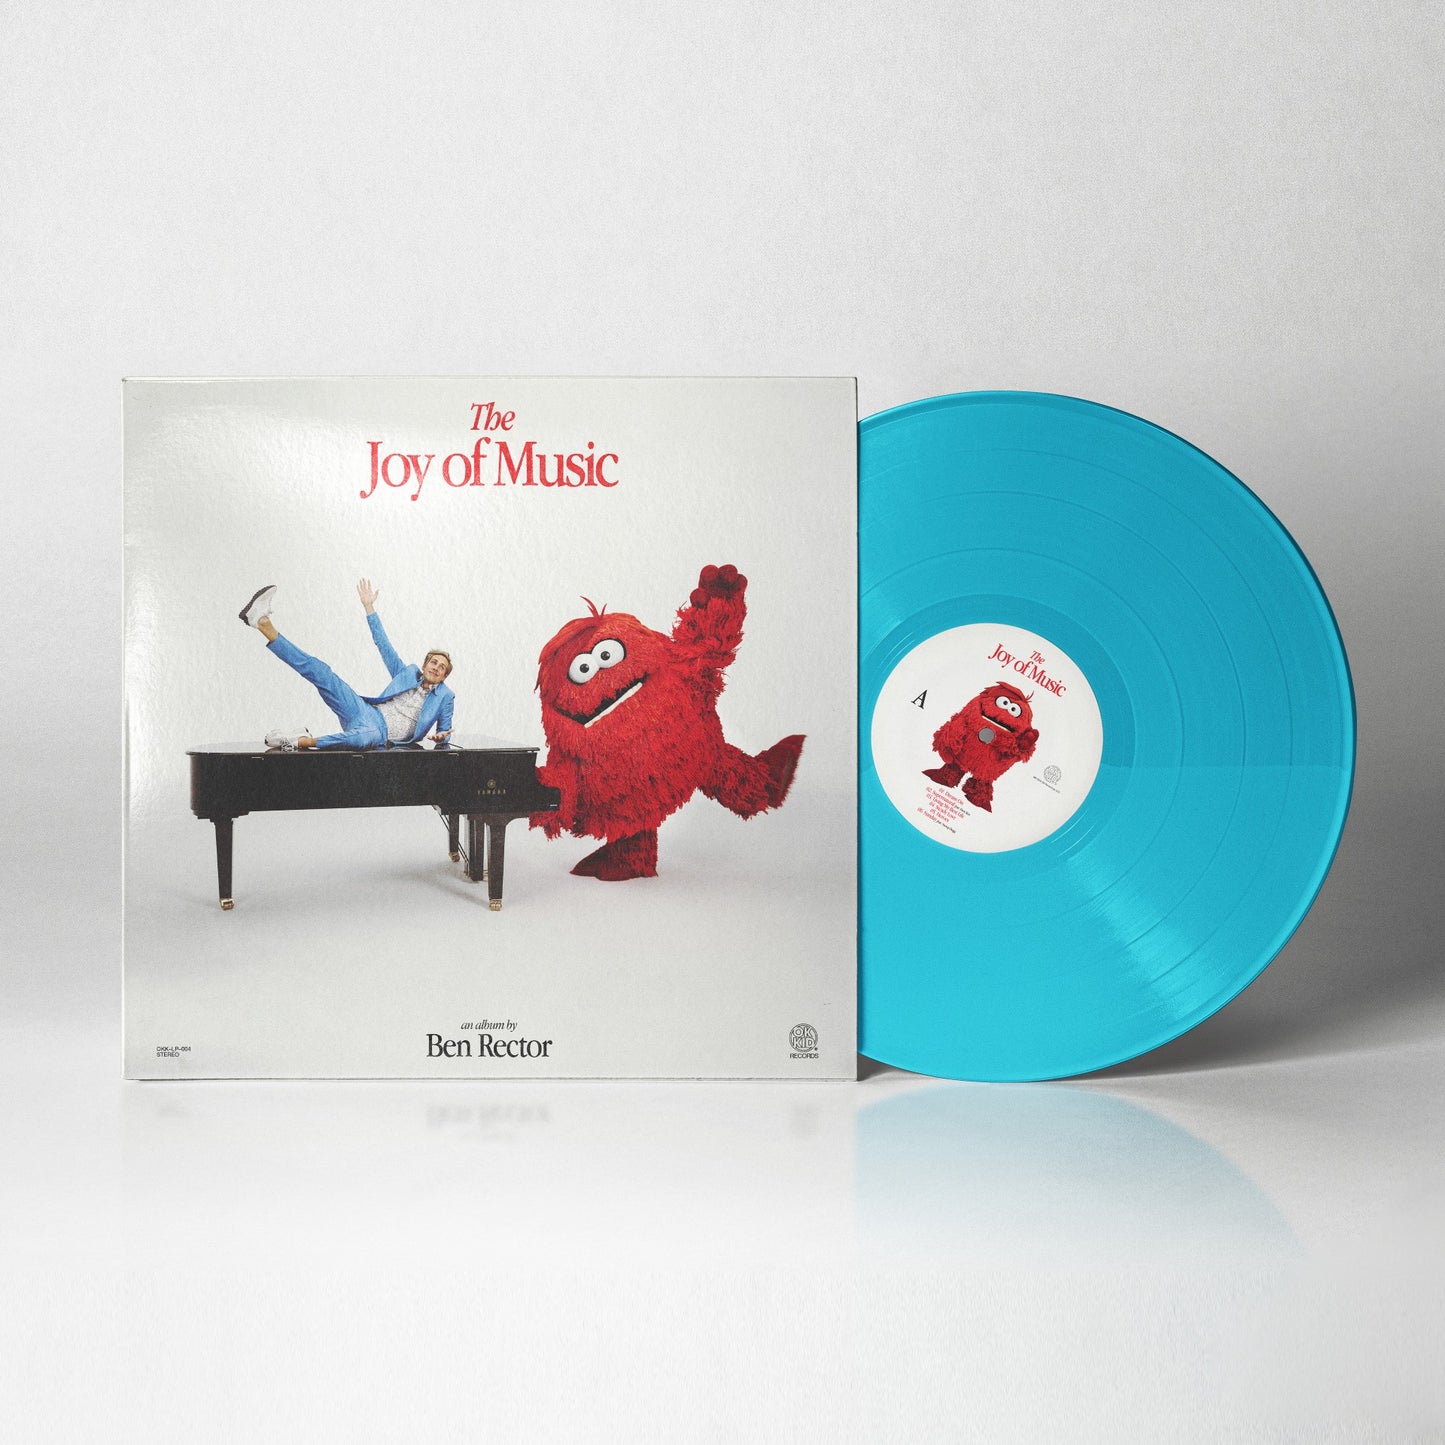 The Joy of Music - Limited First Edition - 180g Vinyl